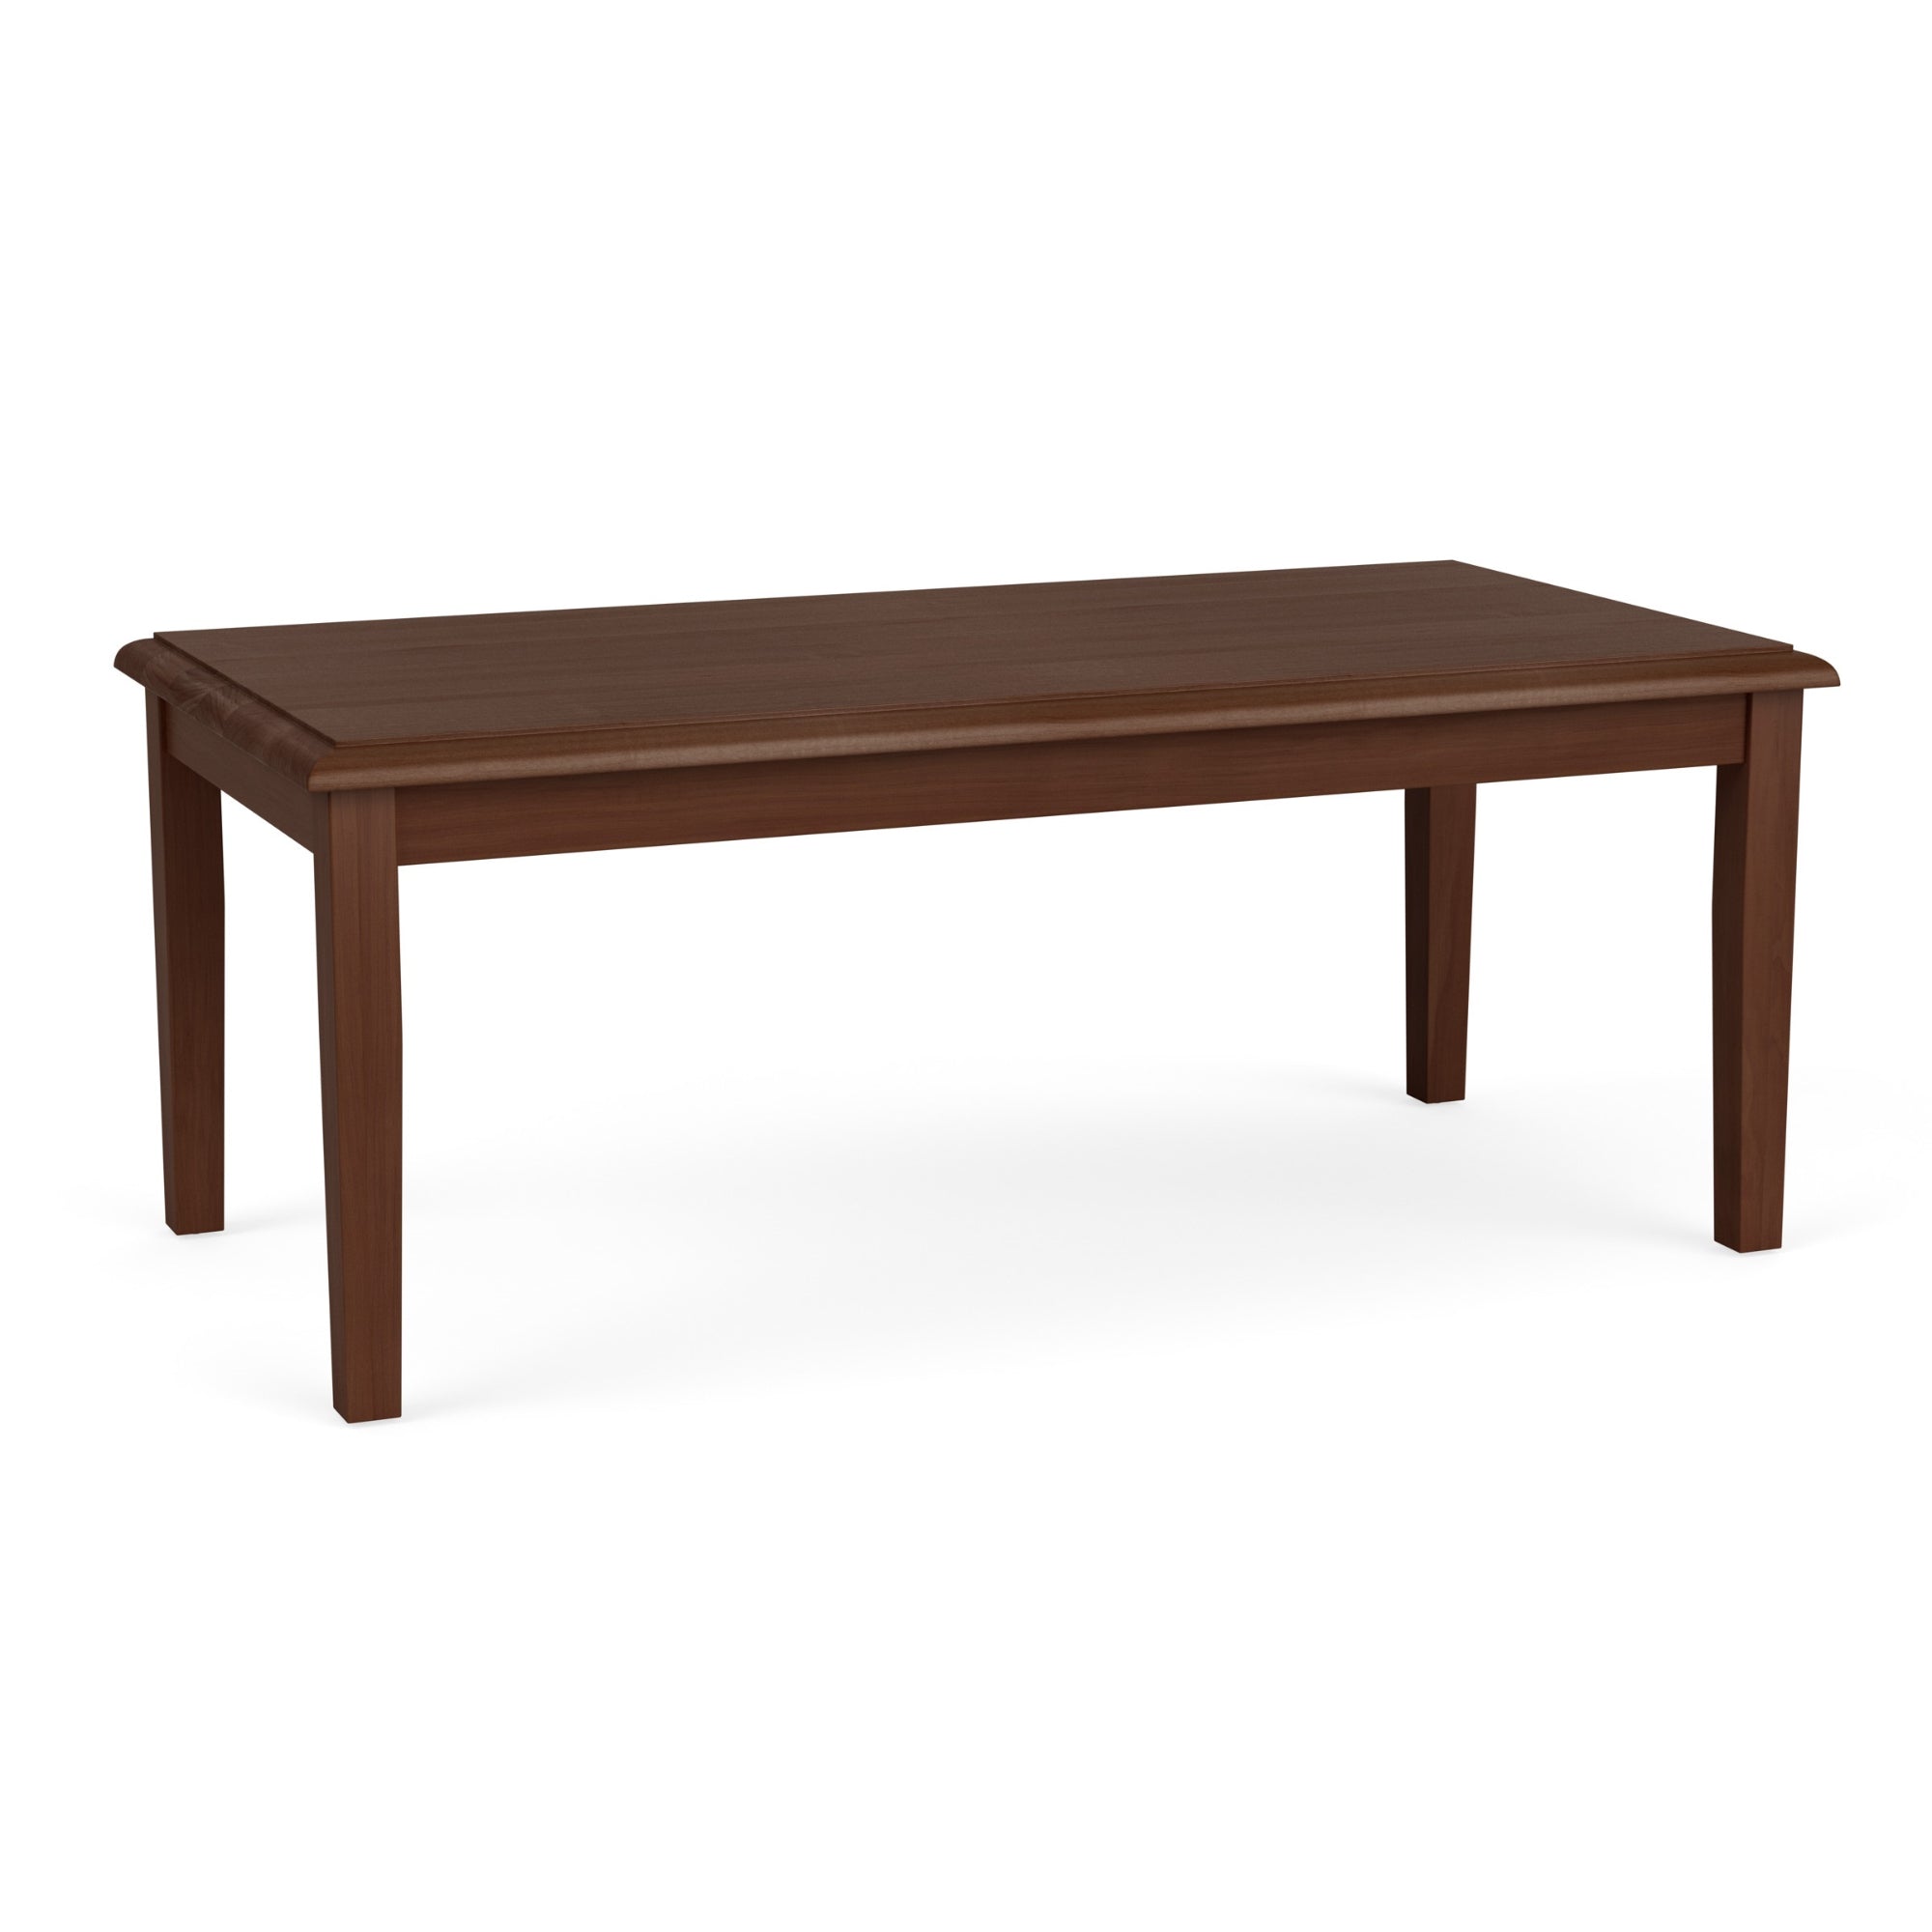 Lenox Wood Collection Coffee Table, Solid Wood Tabletop, FREE SHIPPING